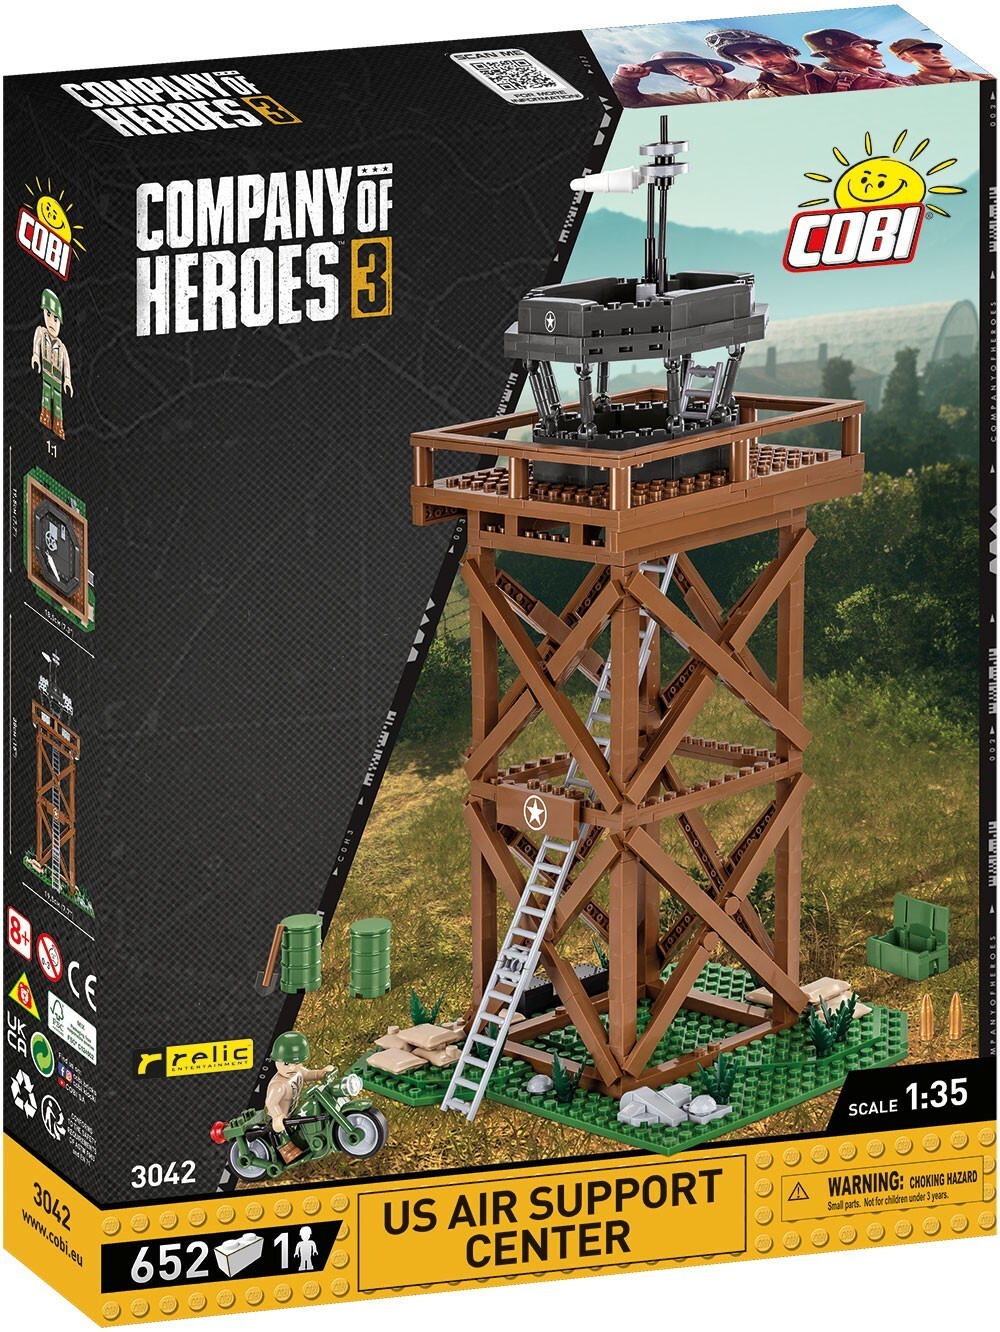 Cover: 5902251030421 | COBI 3042 - Company of Heroes III, US Air Support Center | COBI-3042